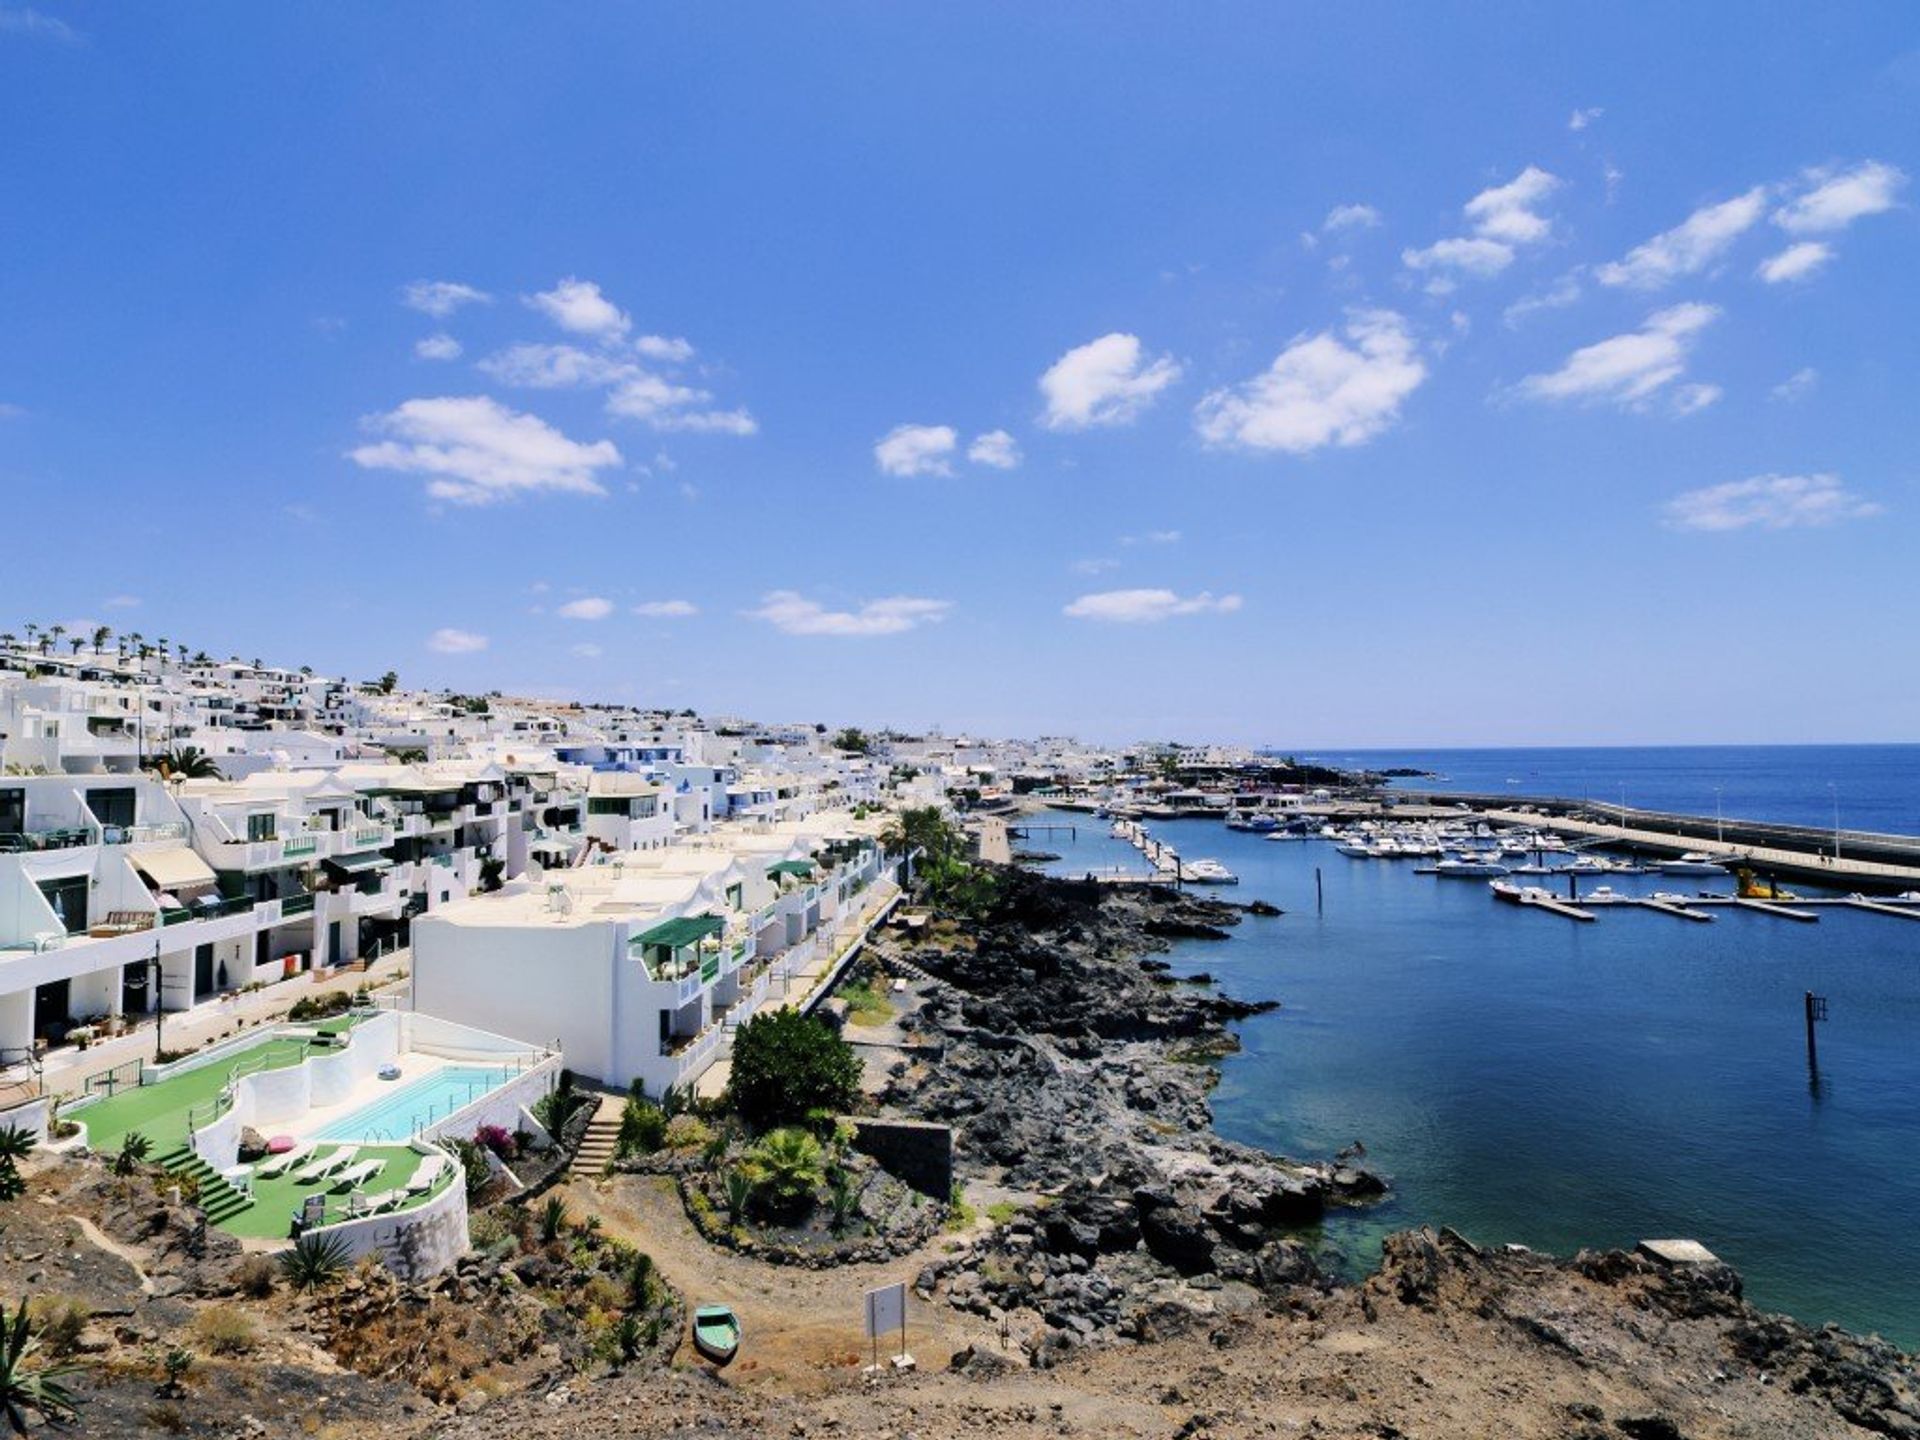 Experience life on the glorious southwest coast of Lanzarote